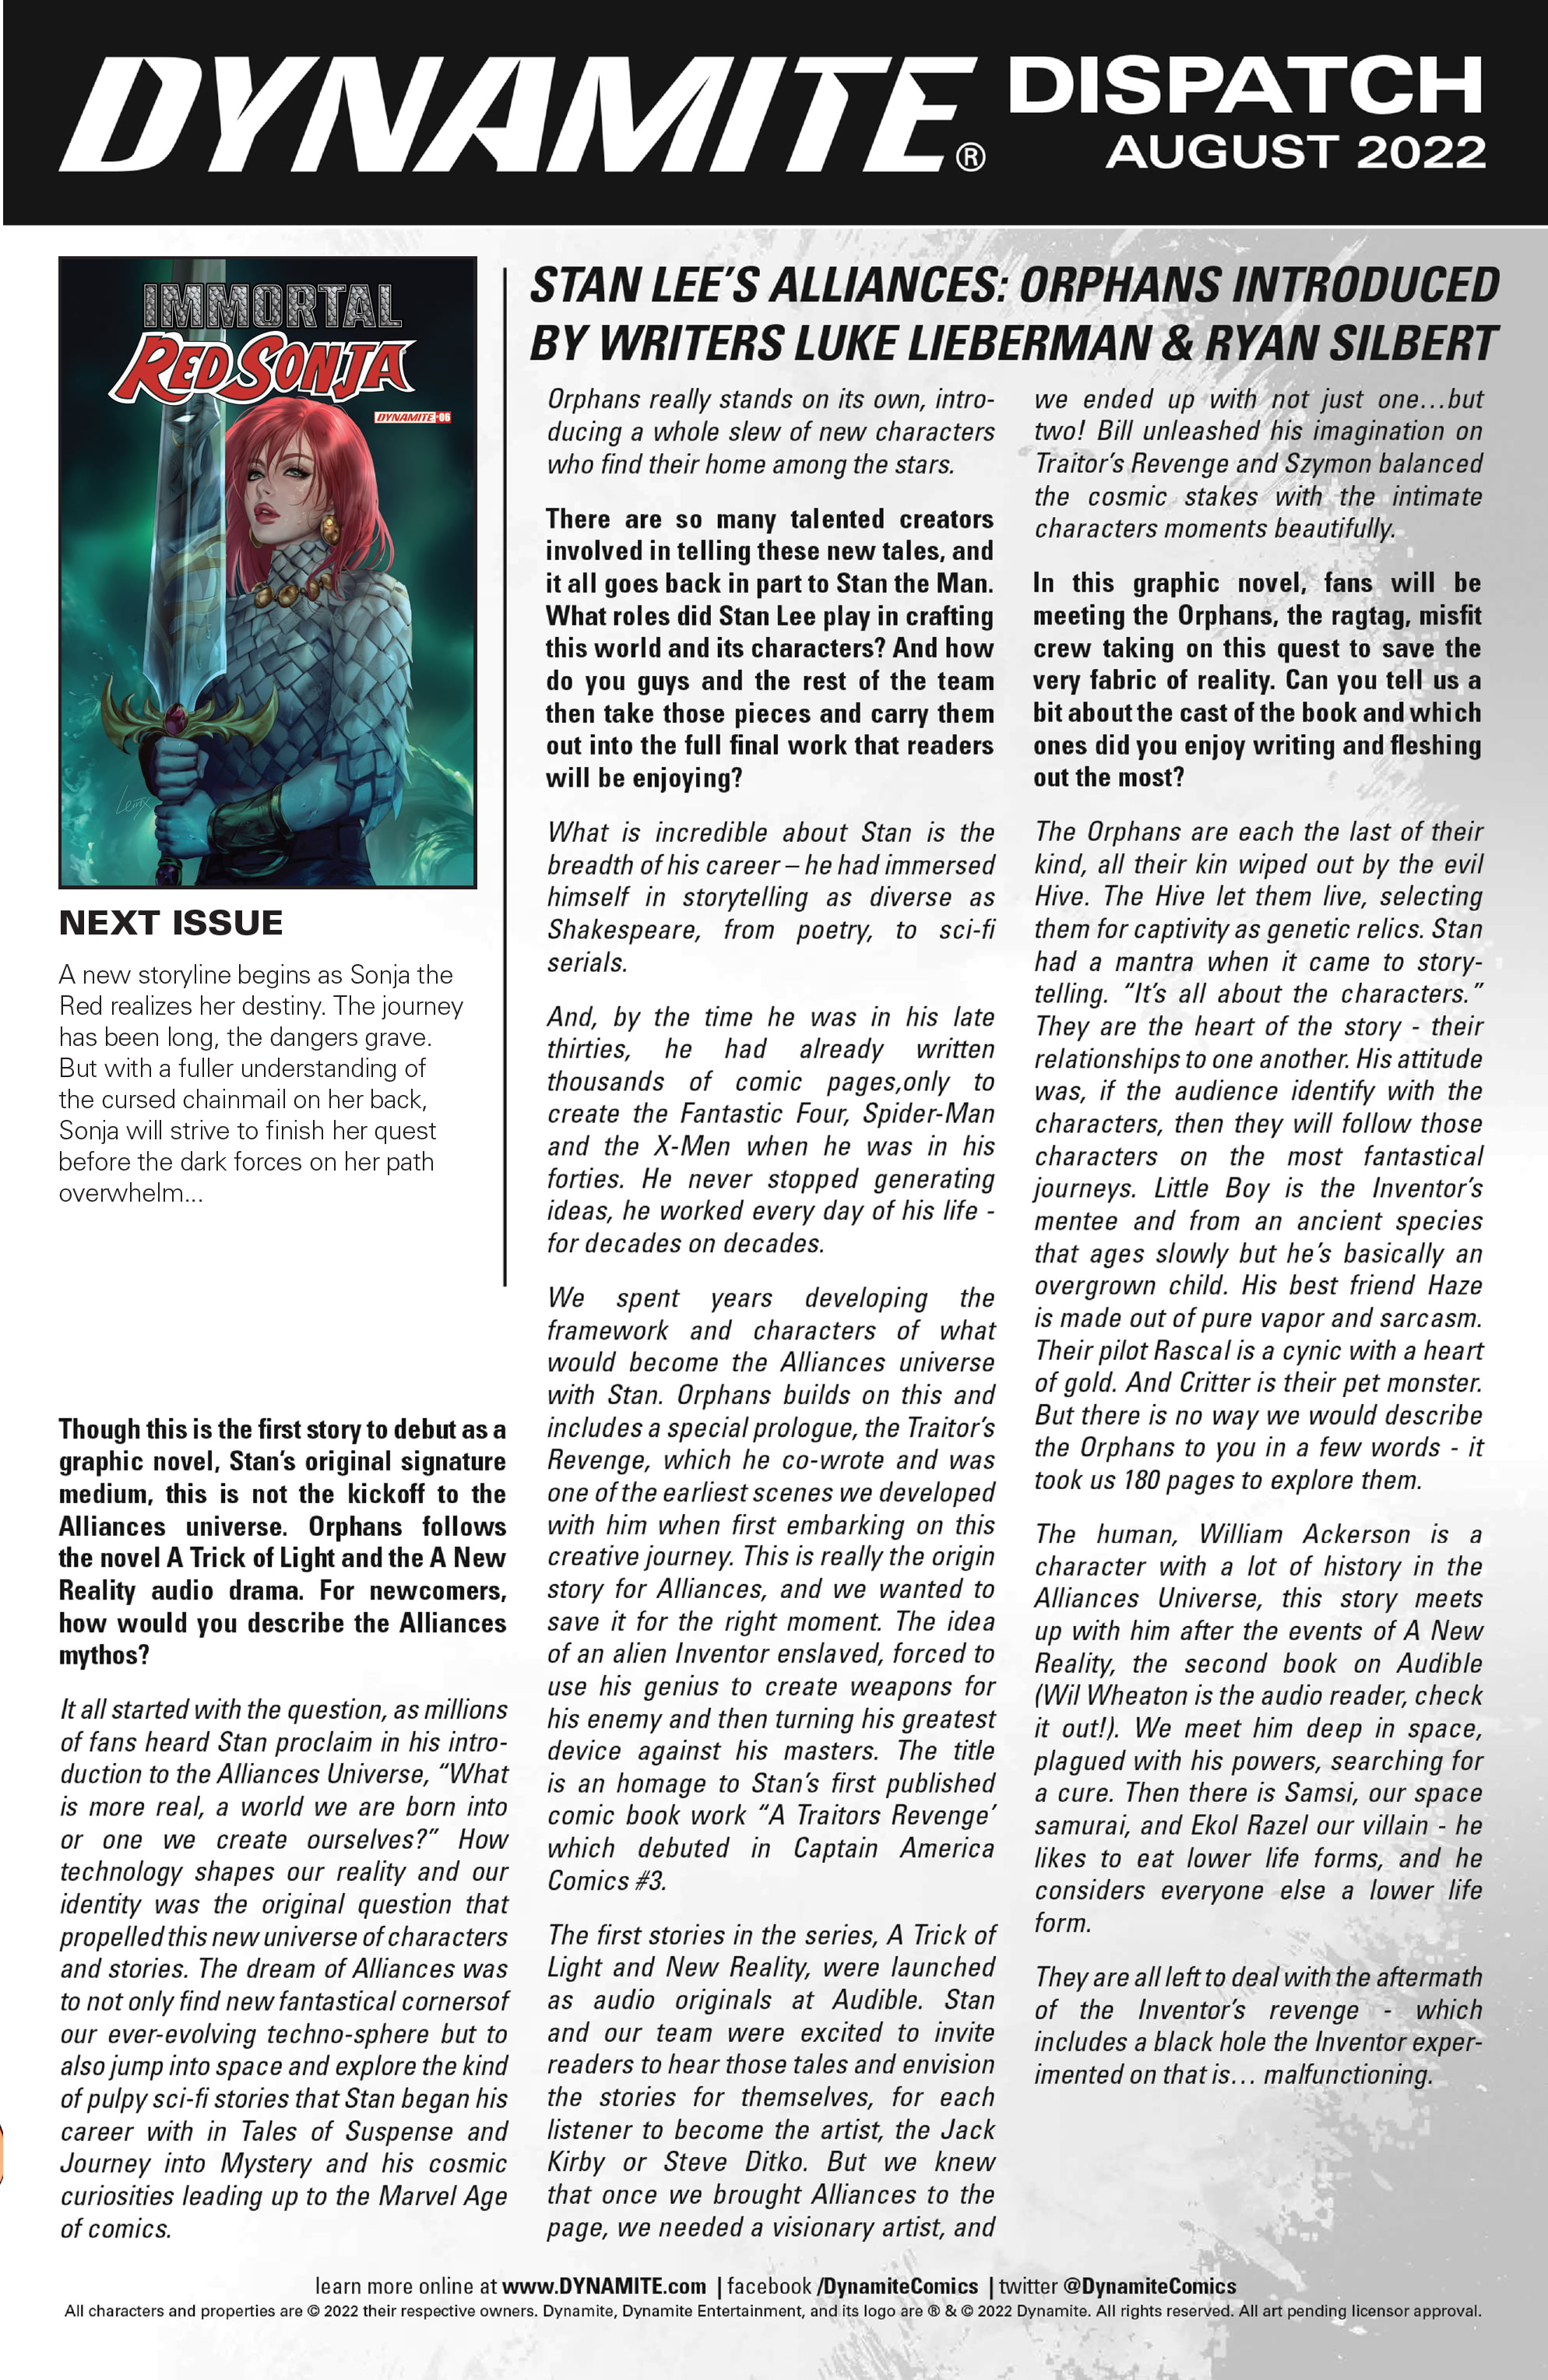 Read online Immortal Red Sonja comic -  Issue #5 - 29